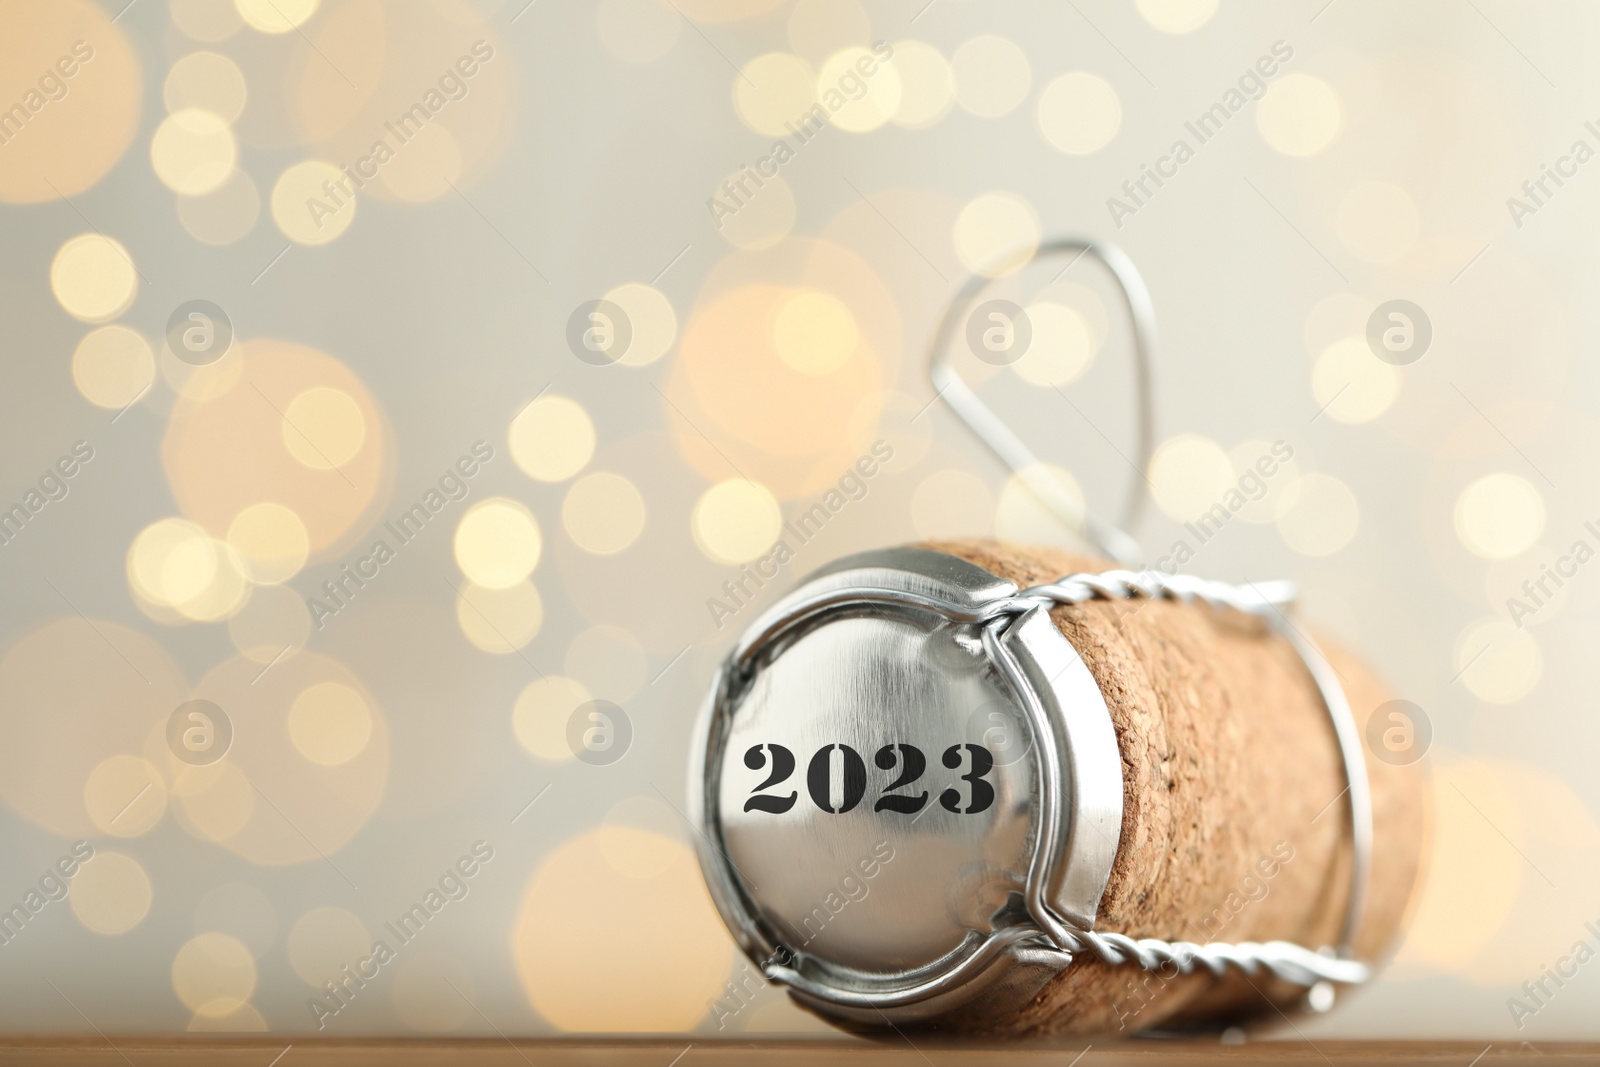 Image of Cork of sparkling wine and muselet cap with engraving 2023 on wooden table against blurred festive lights, space for text. Bokeh effect